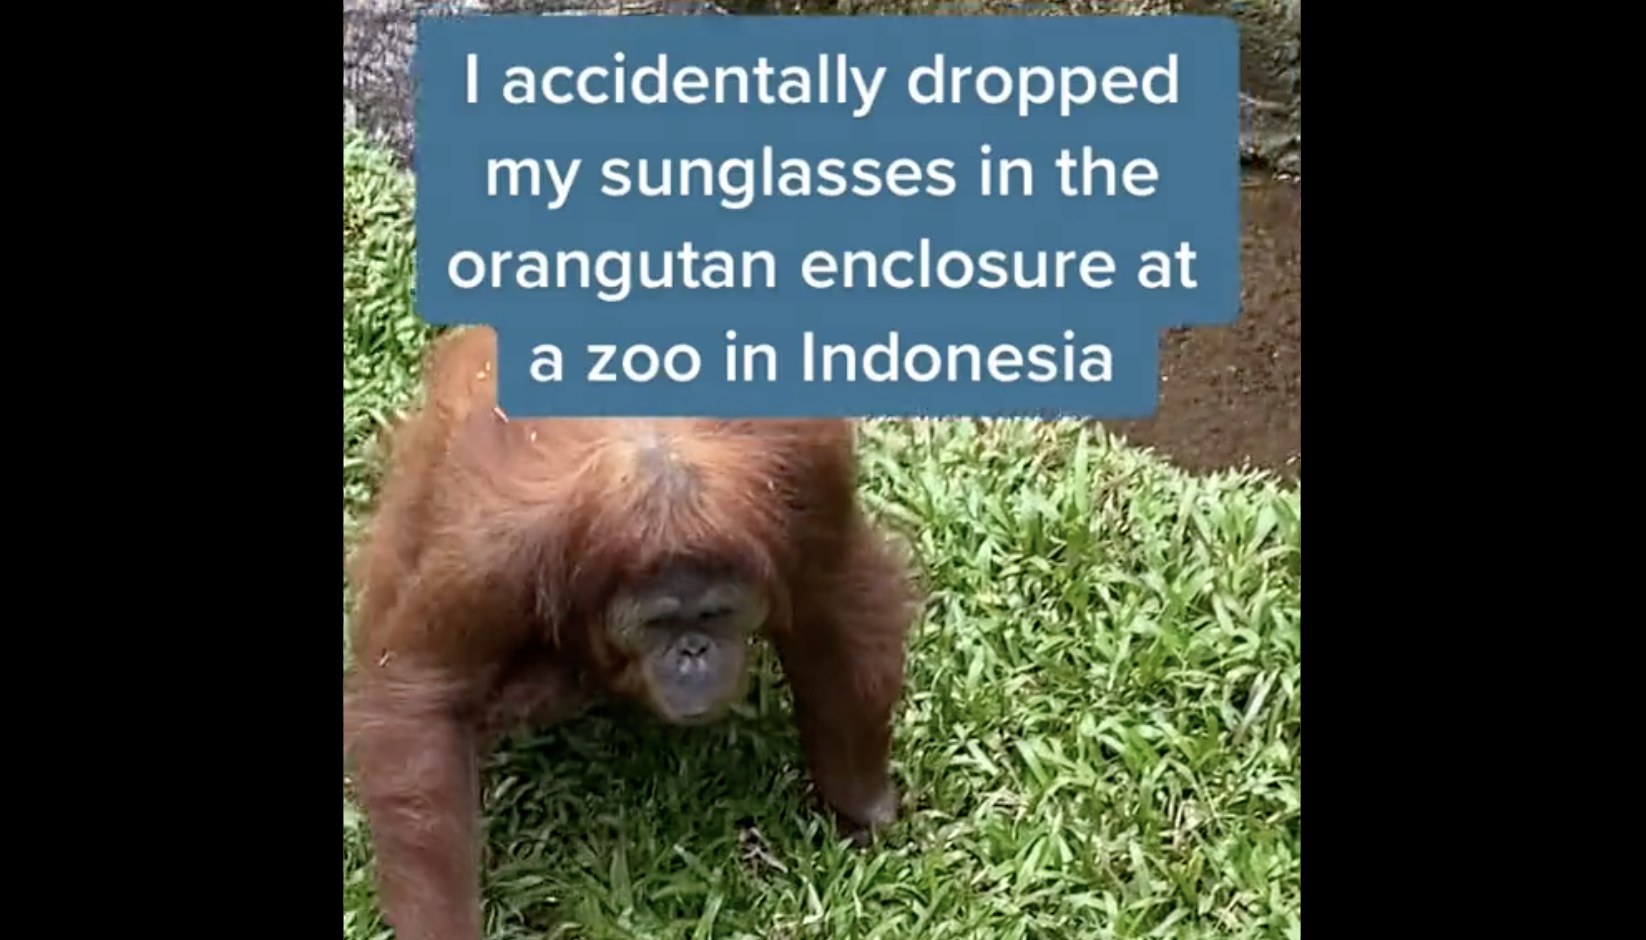 Picture of an Orangutan paired with the headline "I accidentally dropped my sunglasses in the orangutan enclosude at a zoo in indonesia"